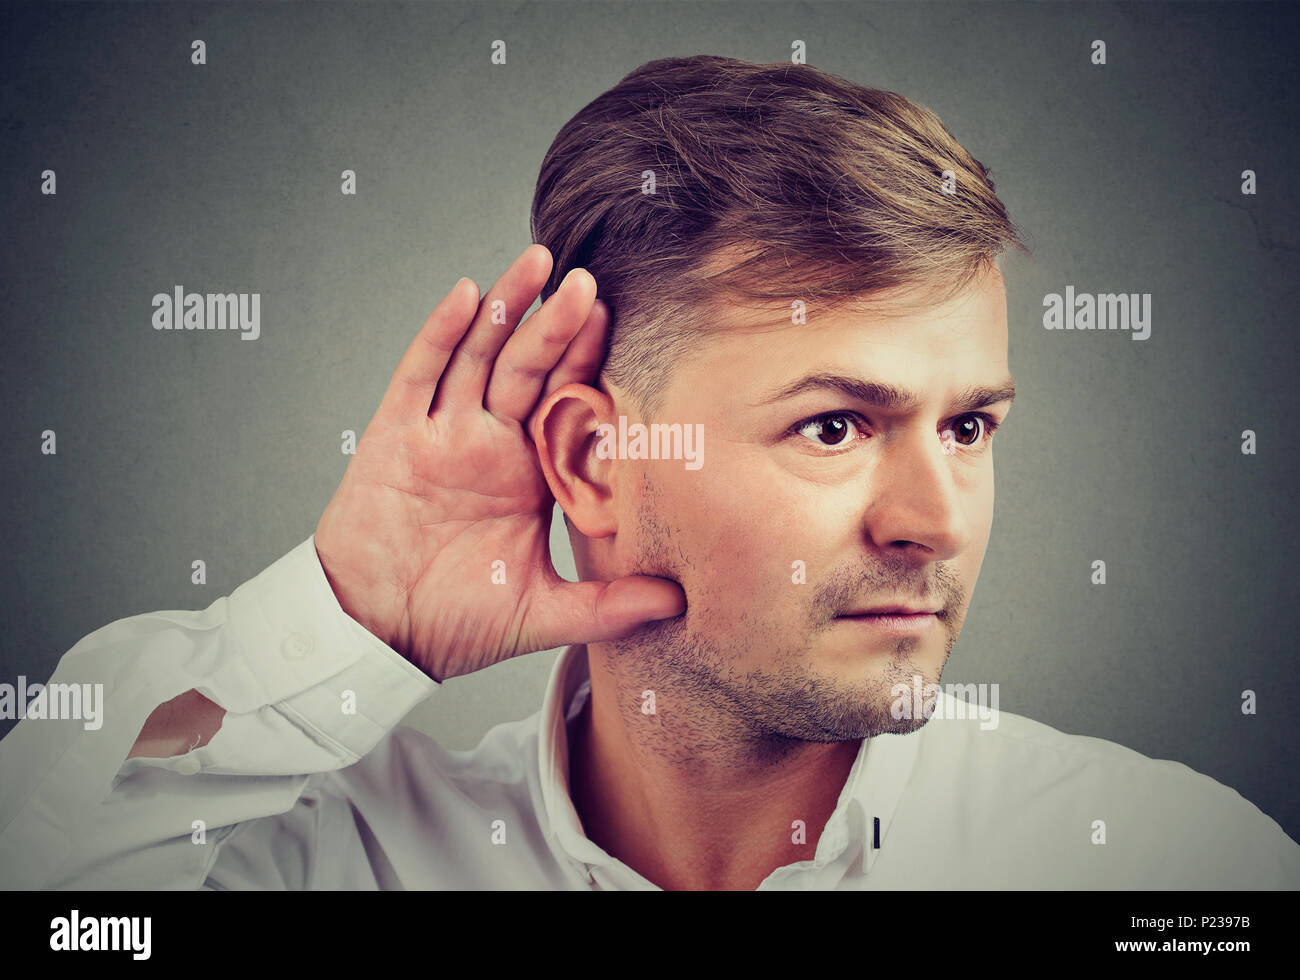 Young man holding hand at ear concentrated on eavesdropping curious about gossip. Stock Photo